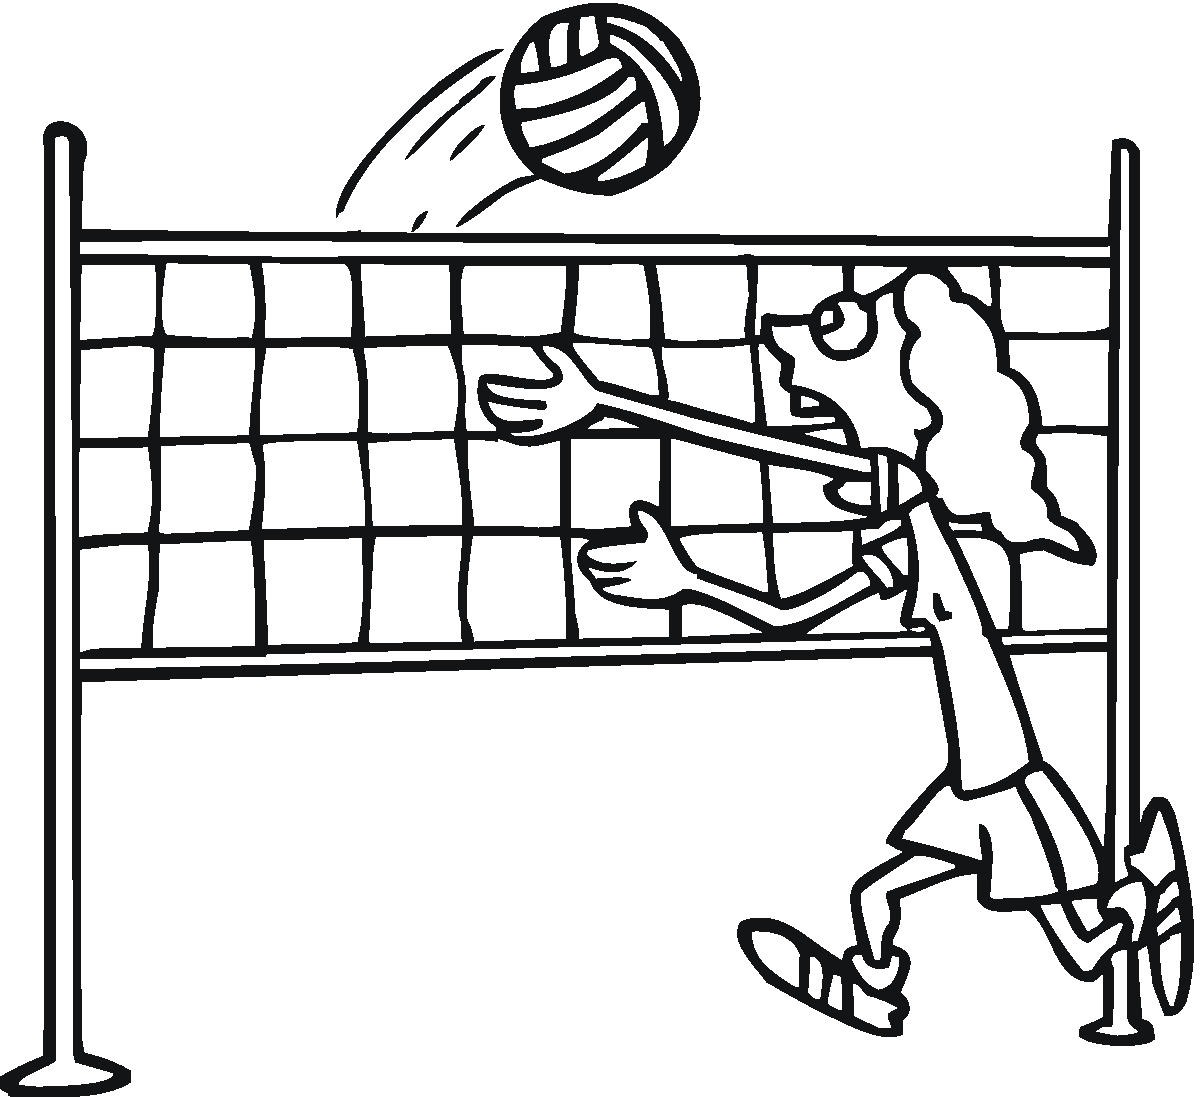 Volleyballs For Kids Coloring Page